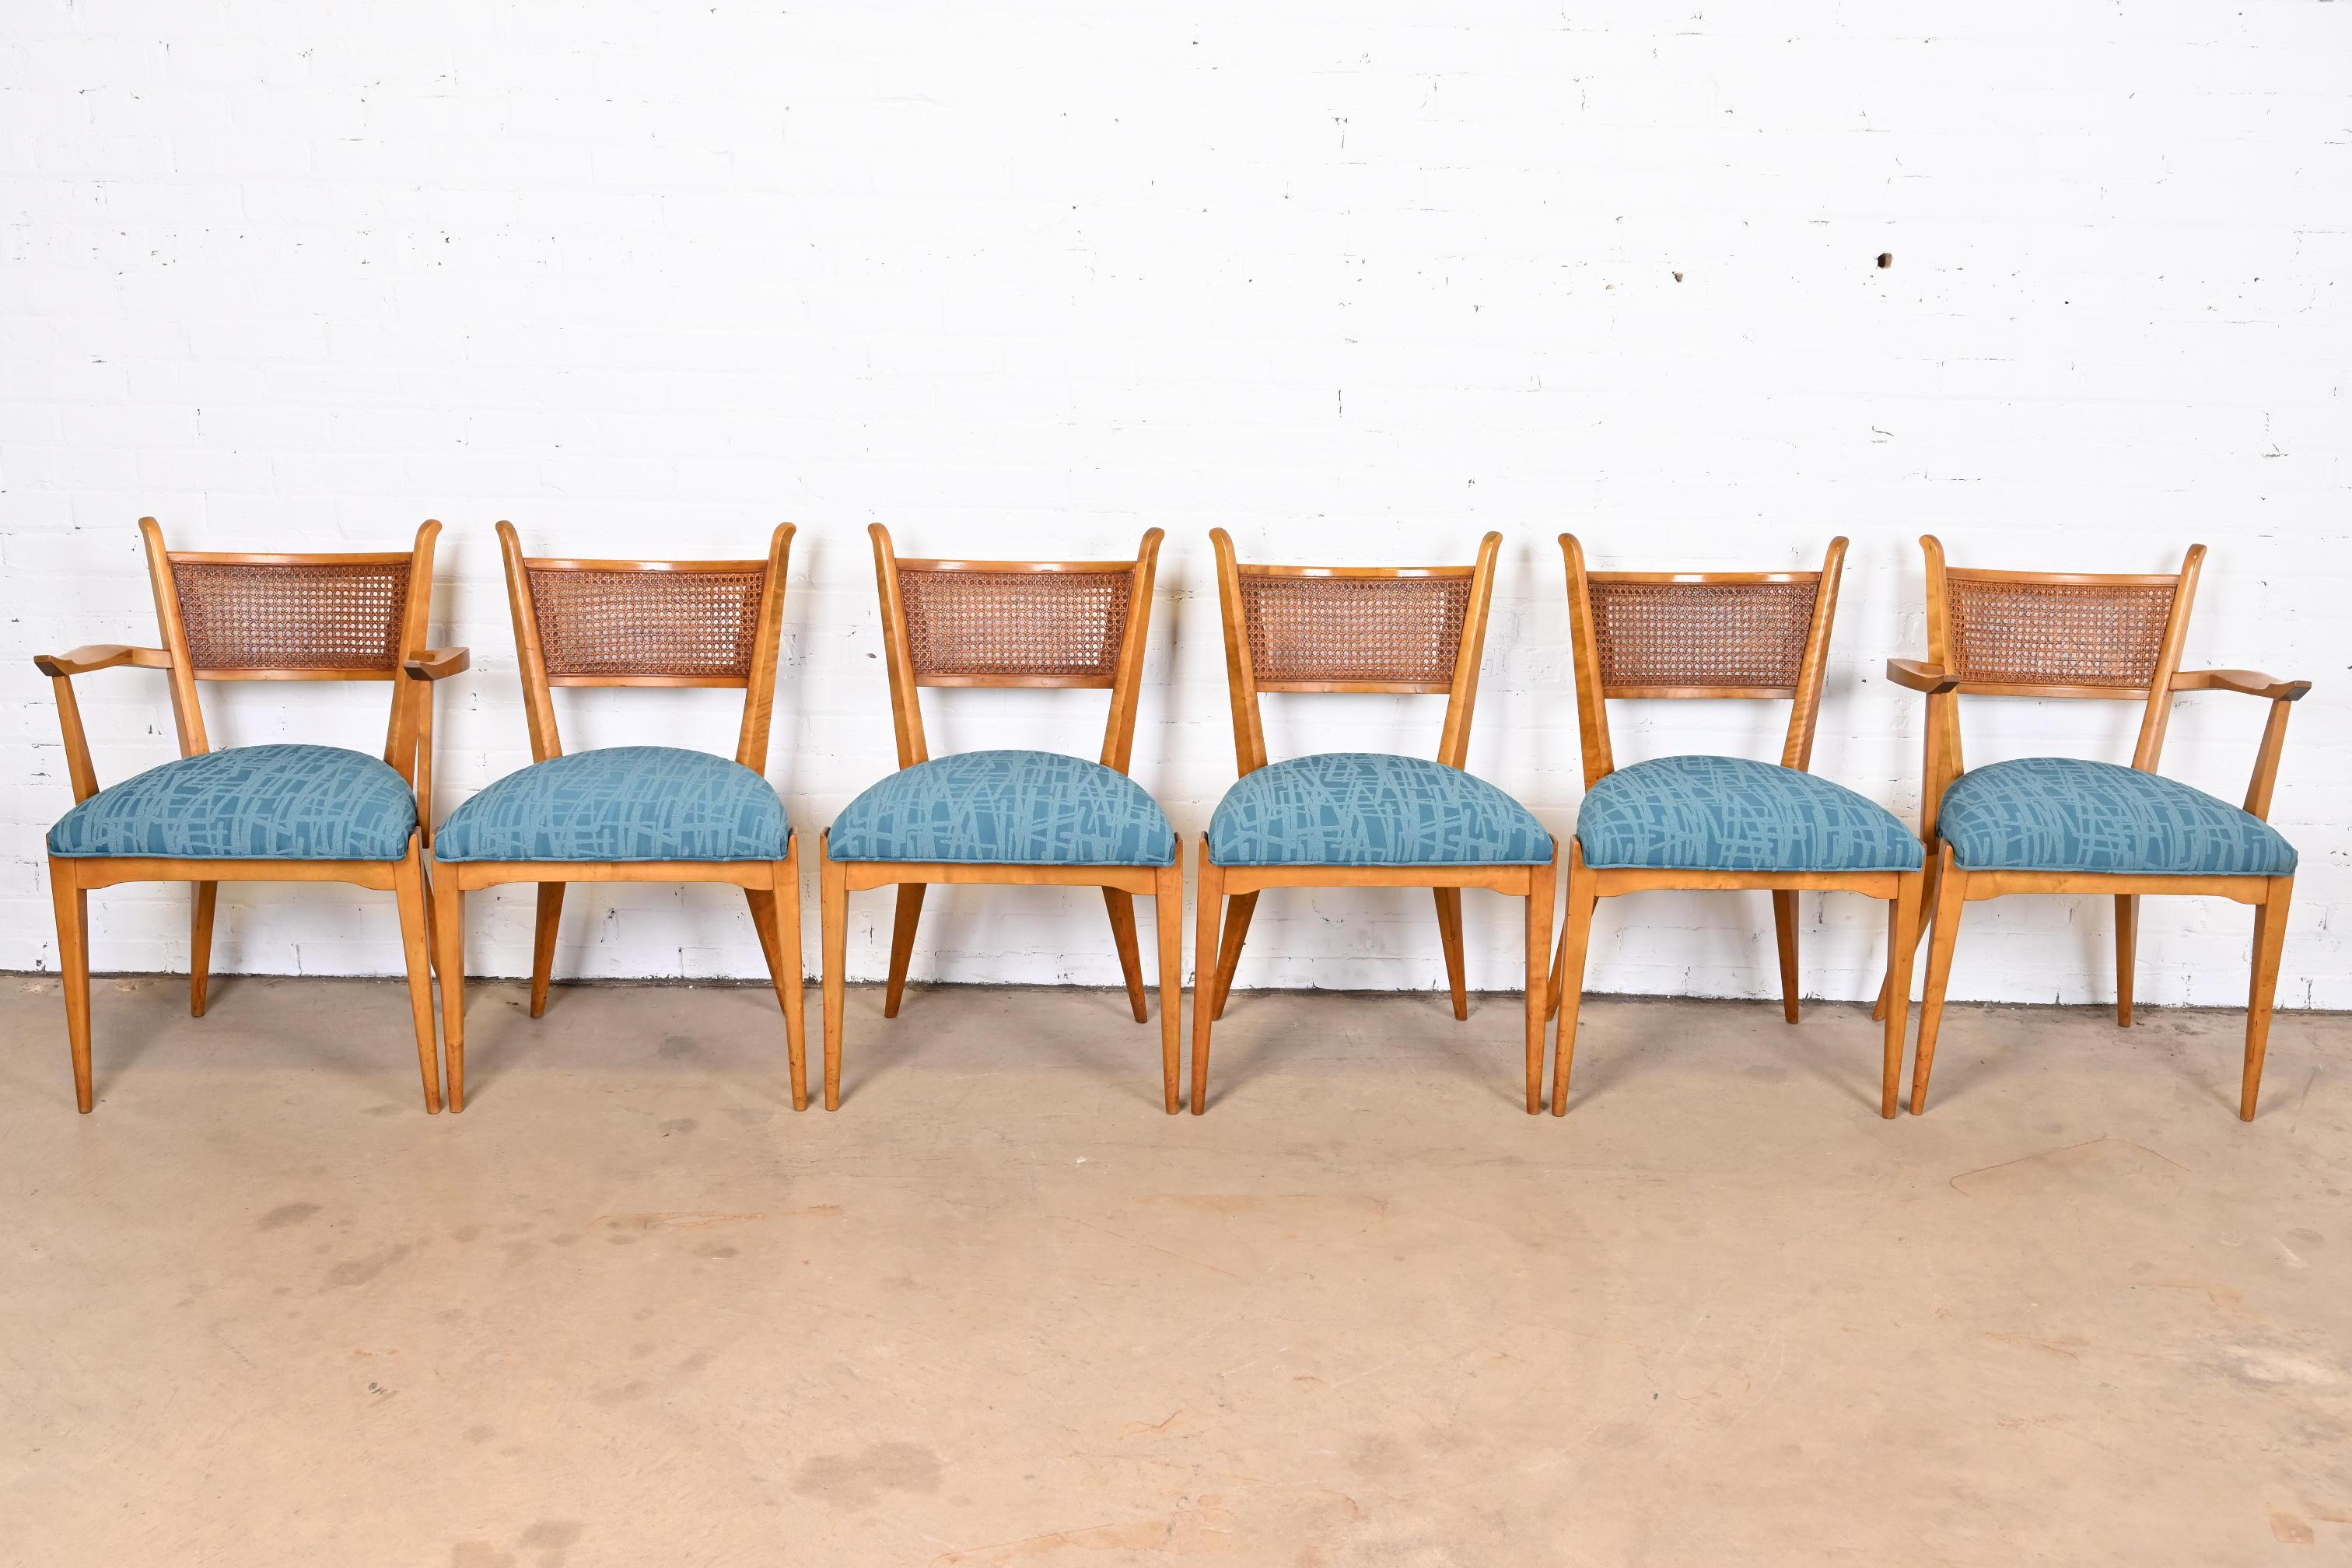 Scandinavian Modern Edmond Spence Swedish Modern Maple and Cane Dining Chairs, Newly Reupholstered For Sale